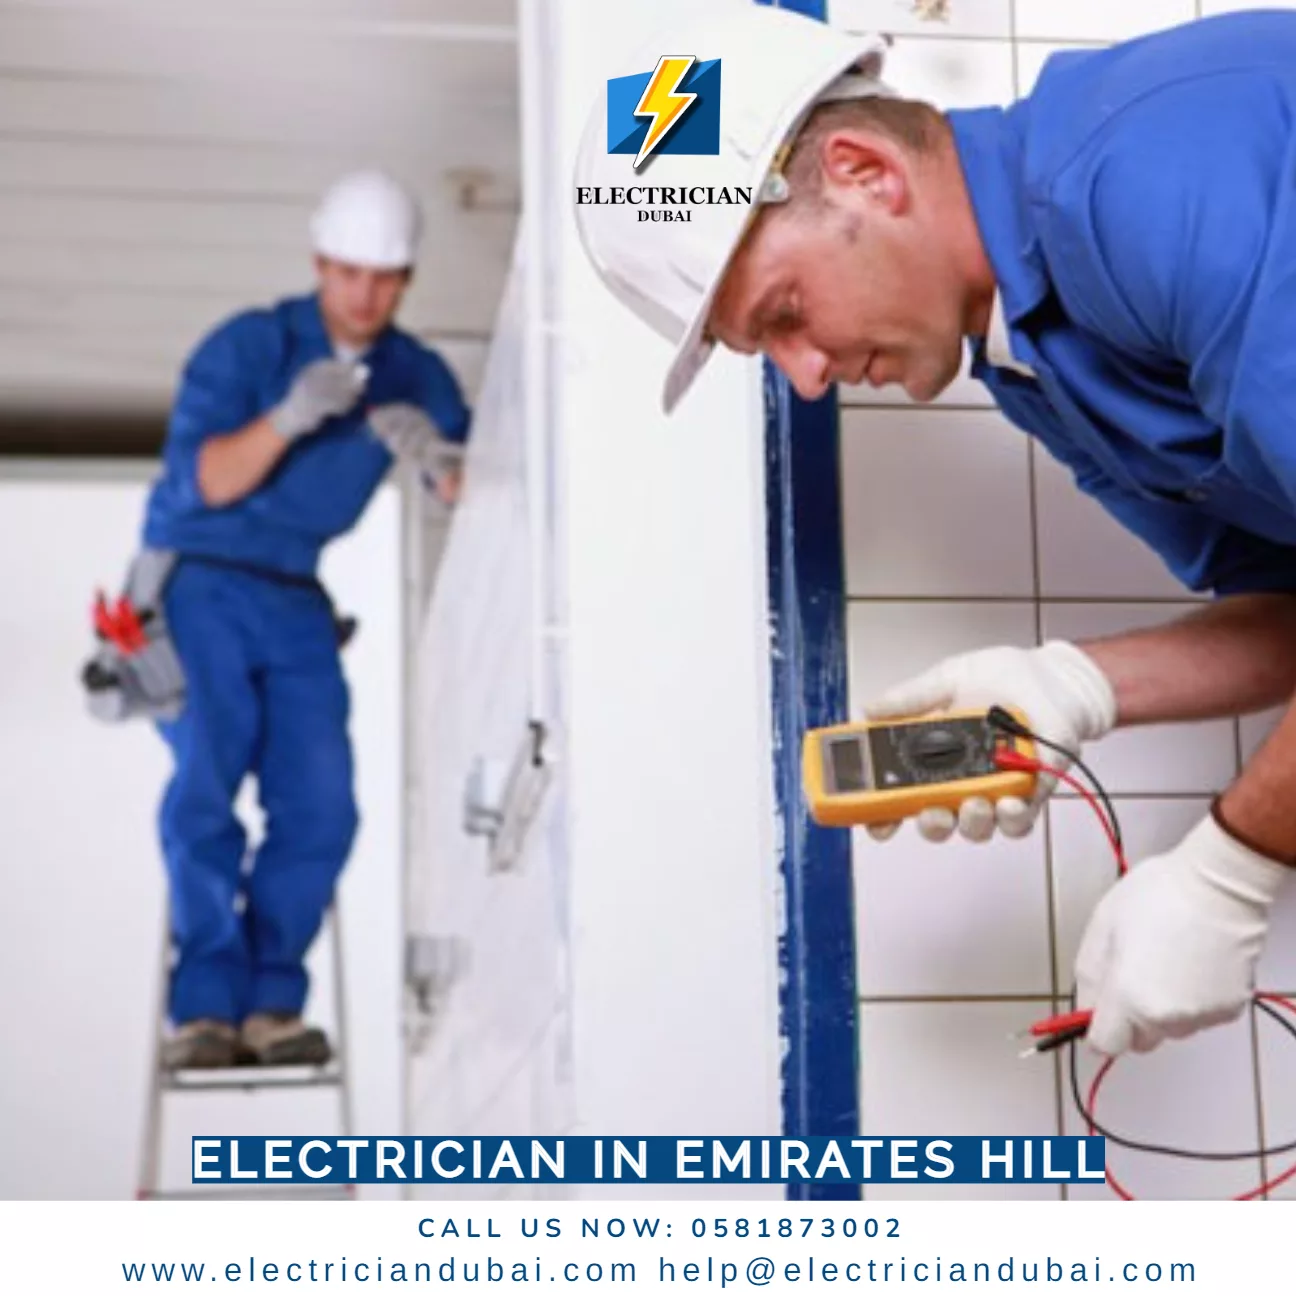 Electrician in Emirates Hill